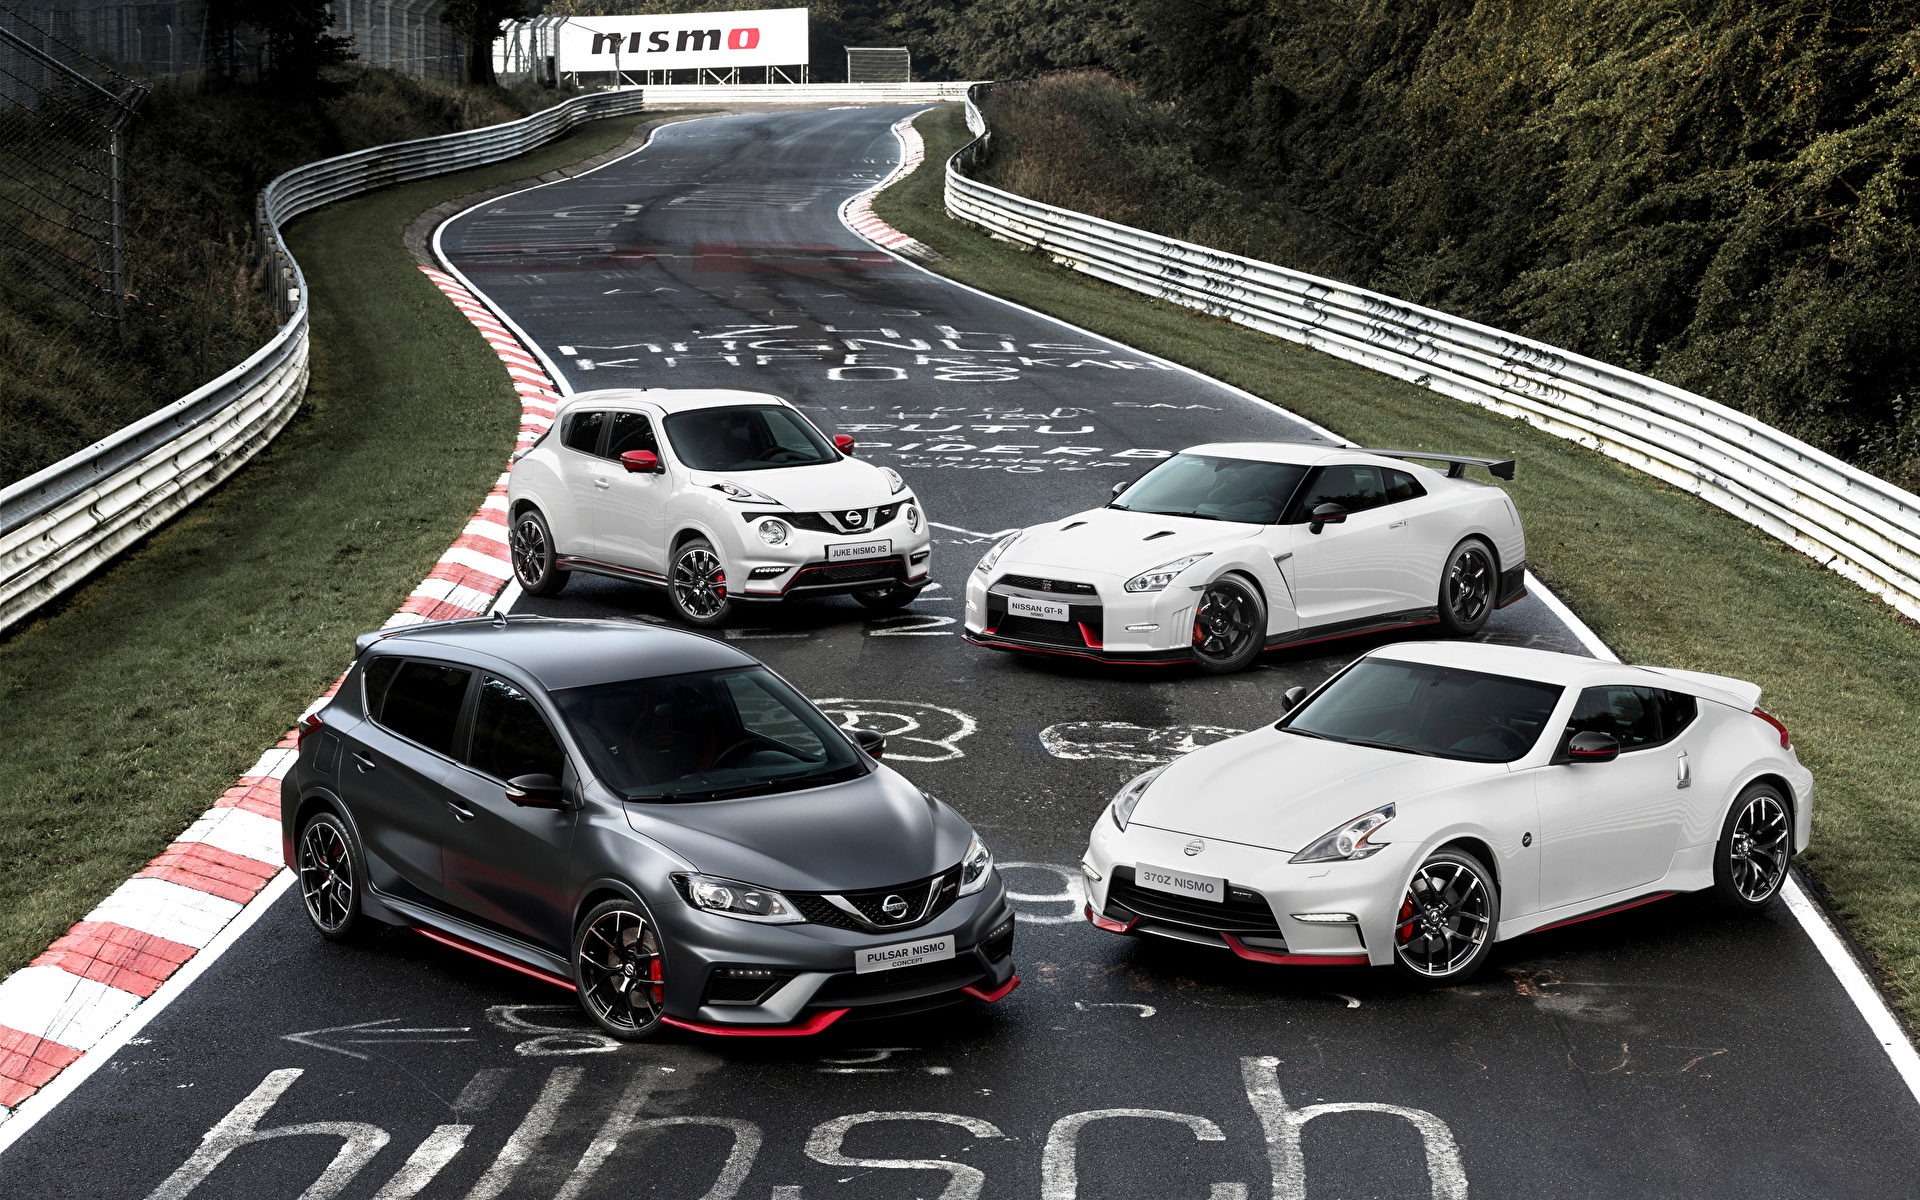 All nismo cars